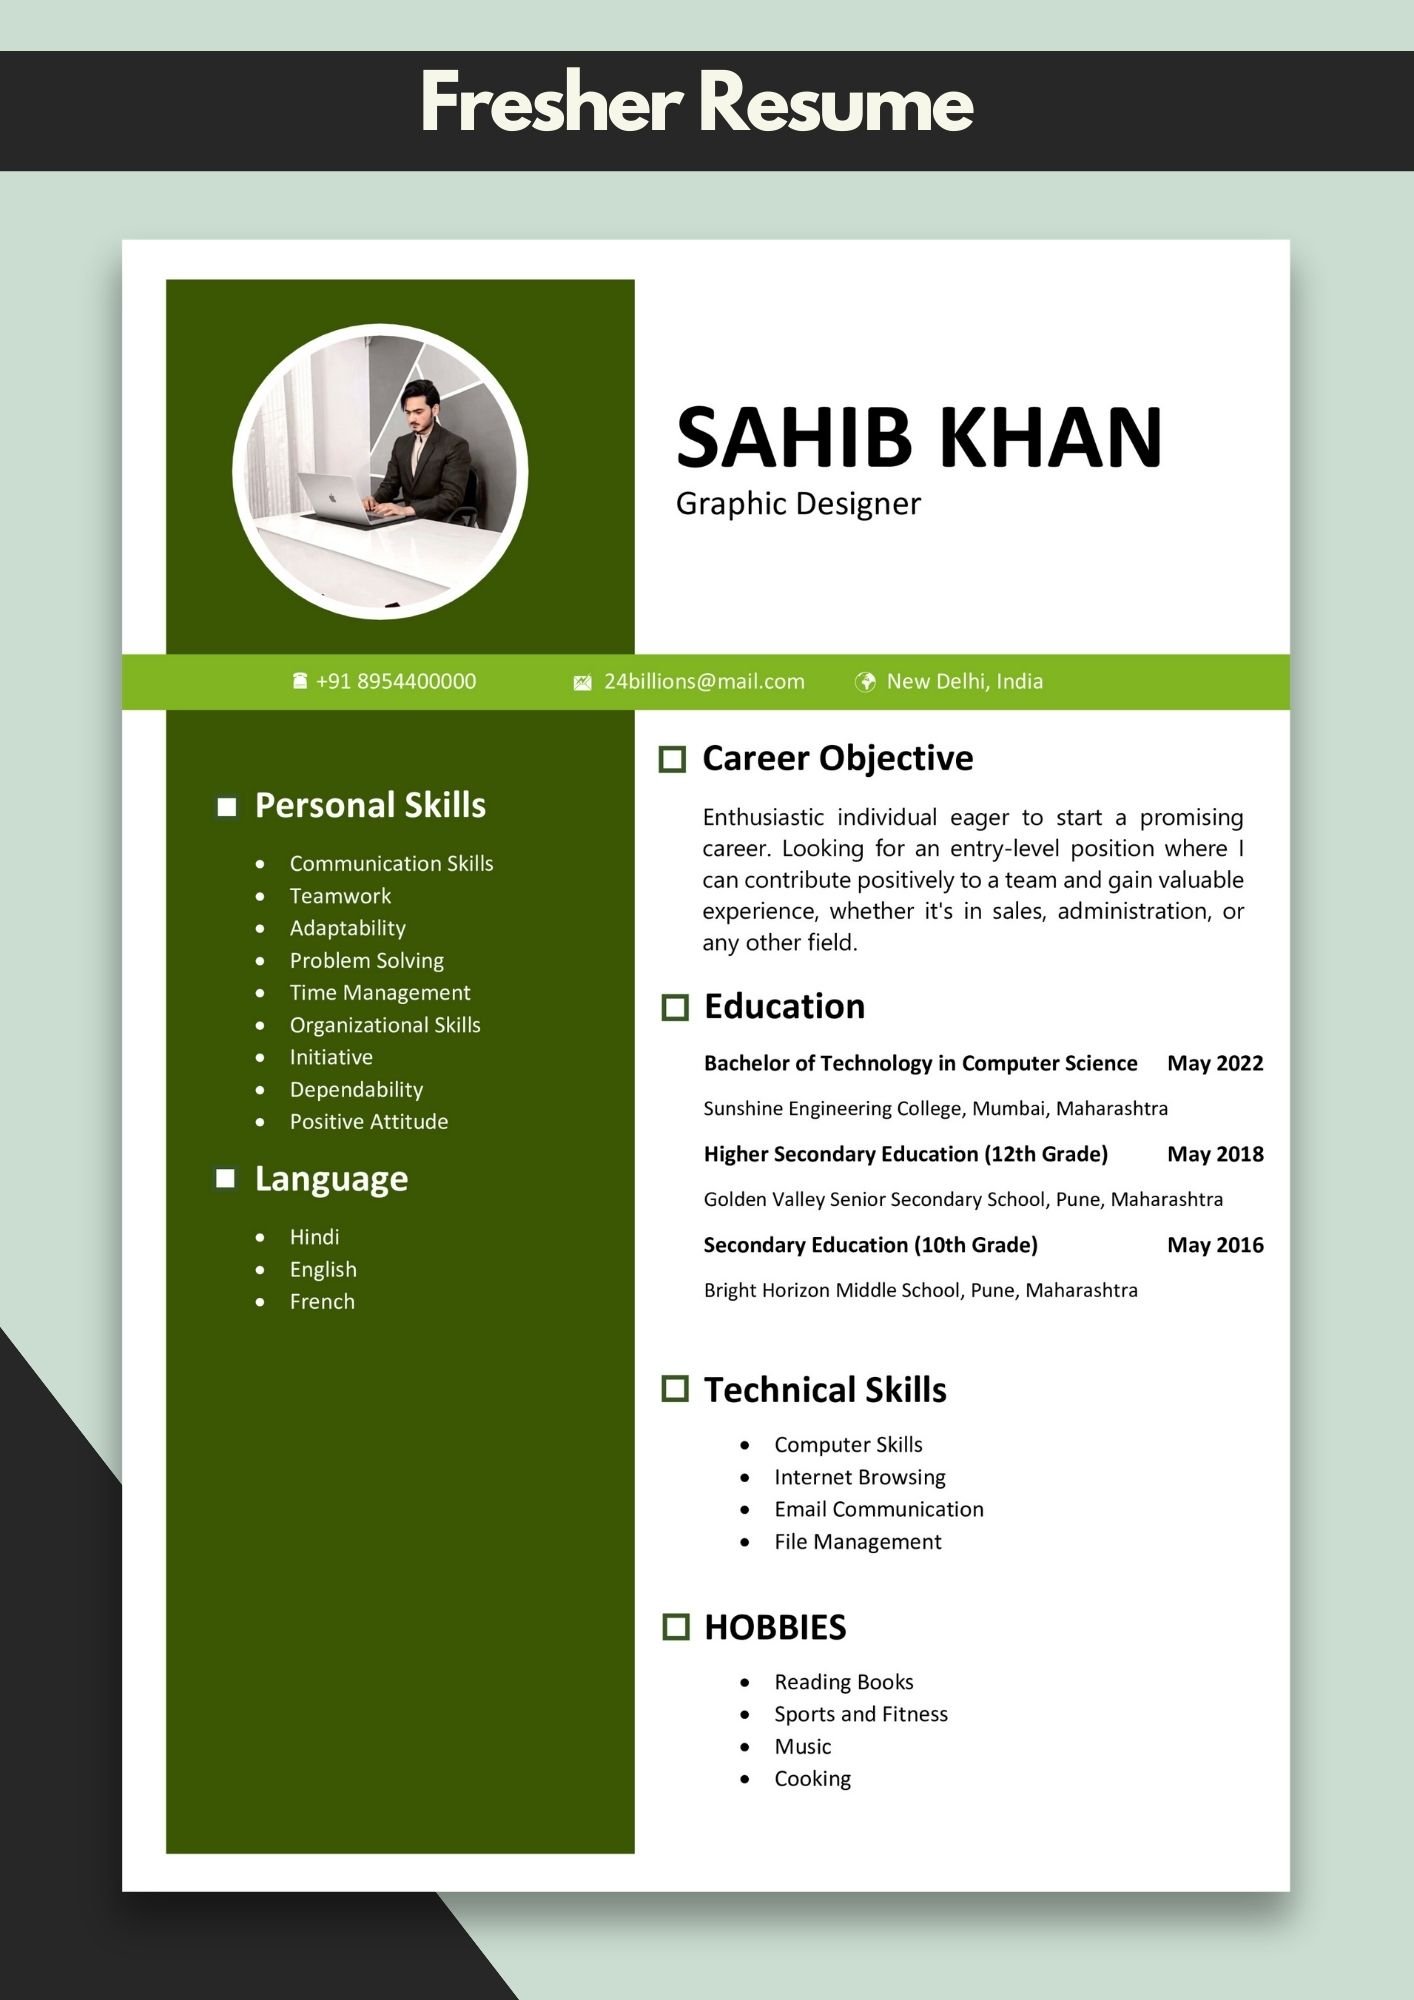 Resume Makers for Freshers | How to Write Resume for Fresher